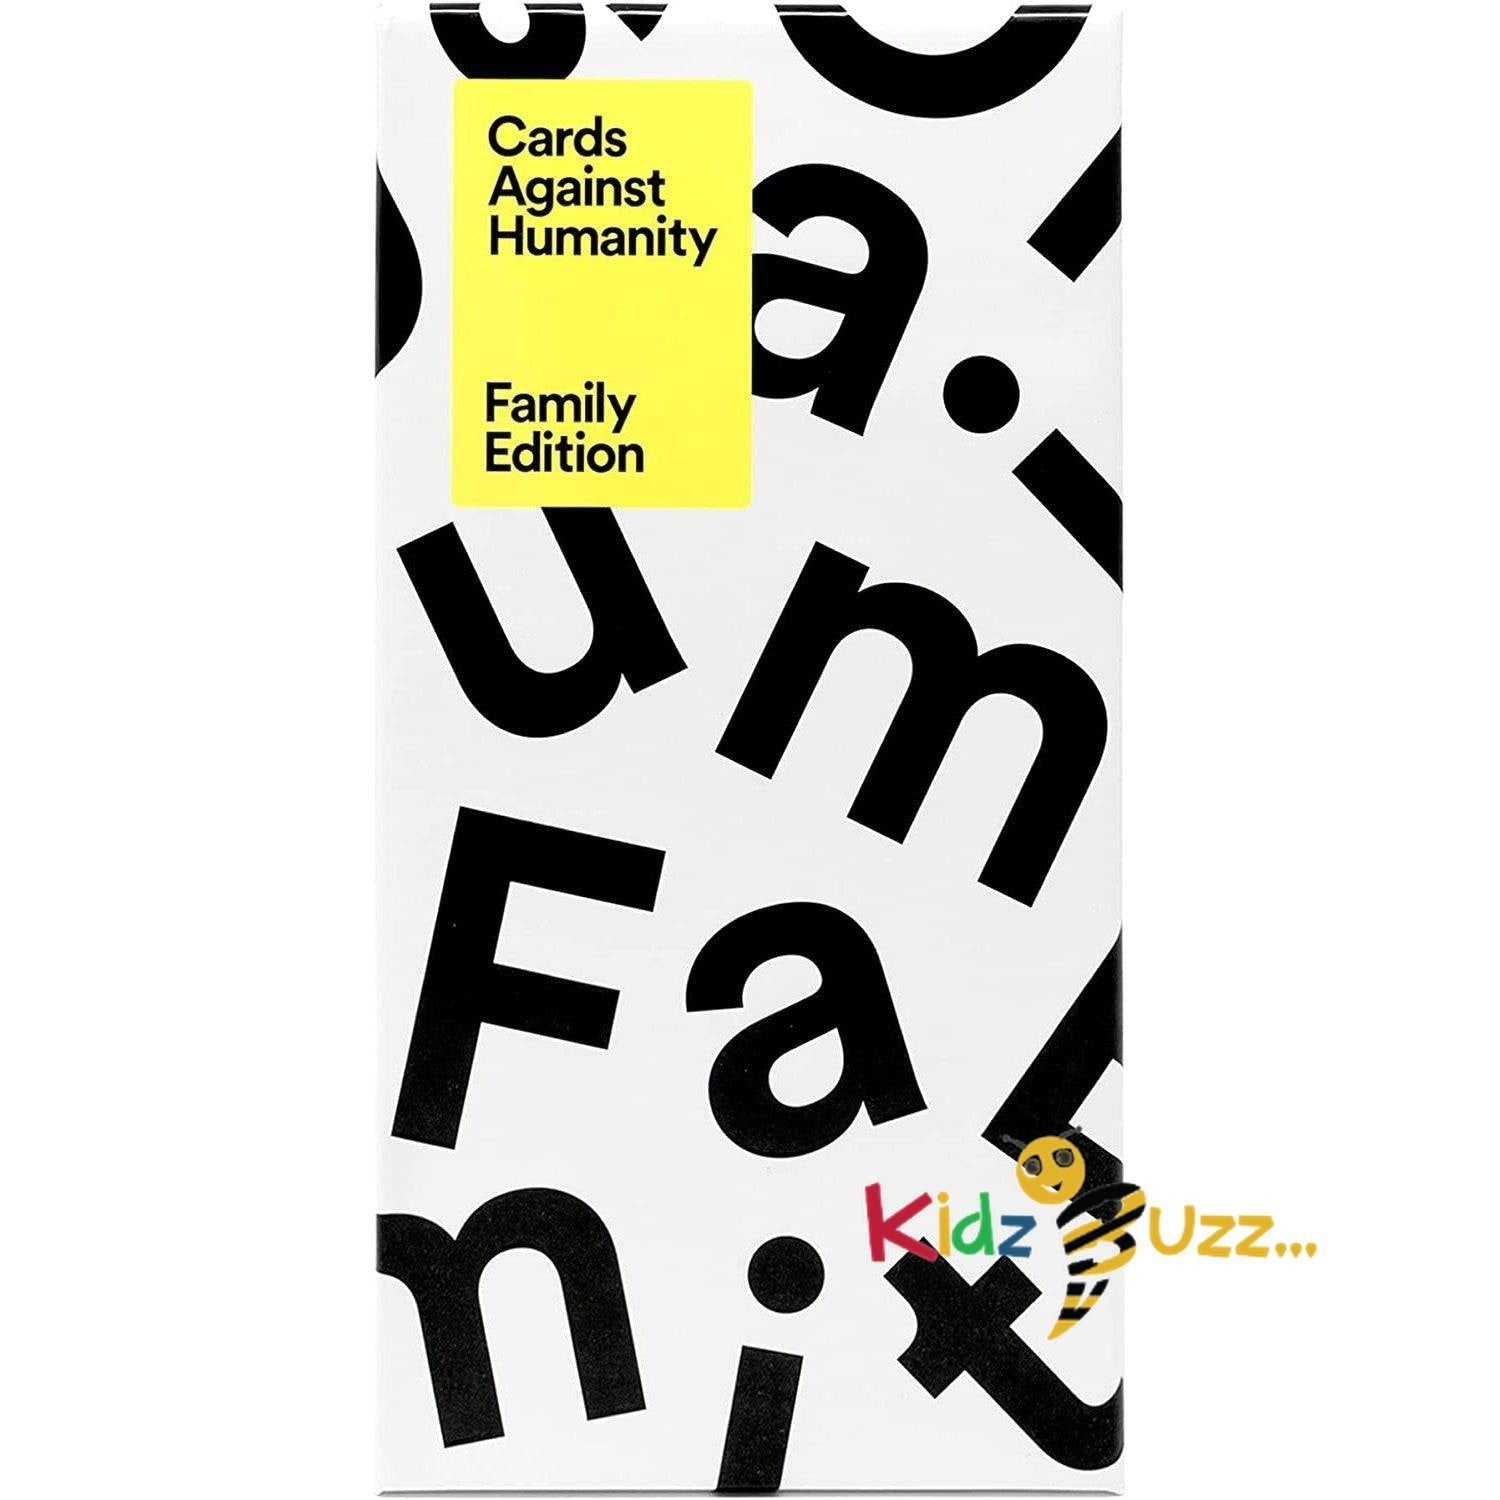 Cards Against Humanity: Family Edition • The Actual, Real, Official Family Edition of CAH